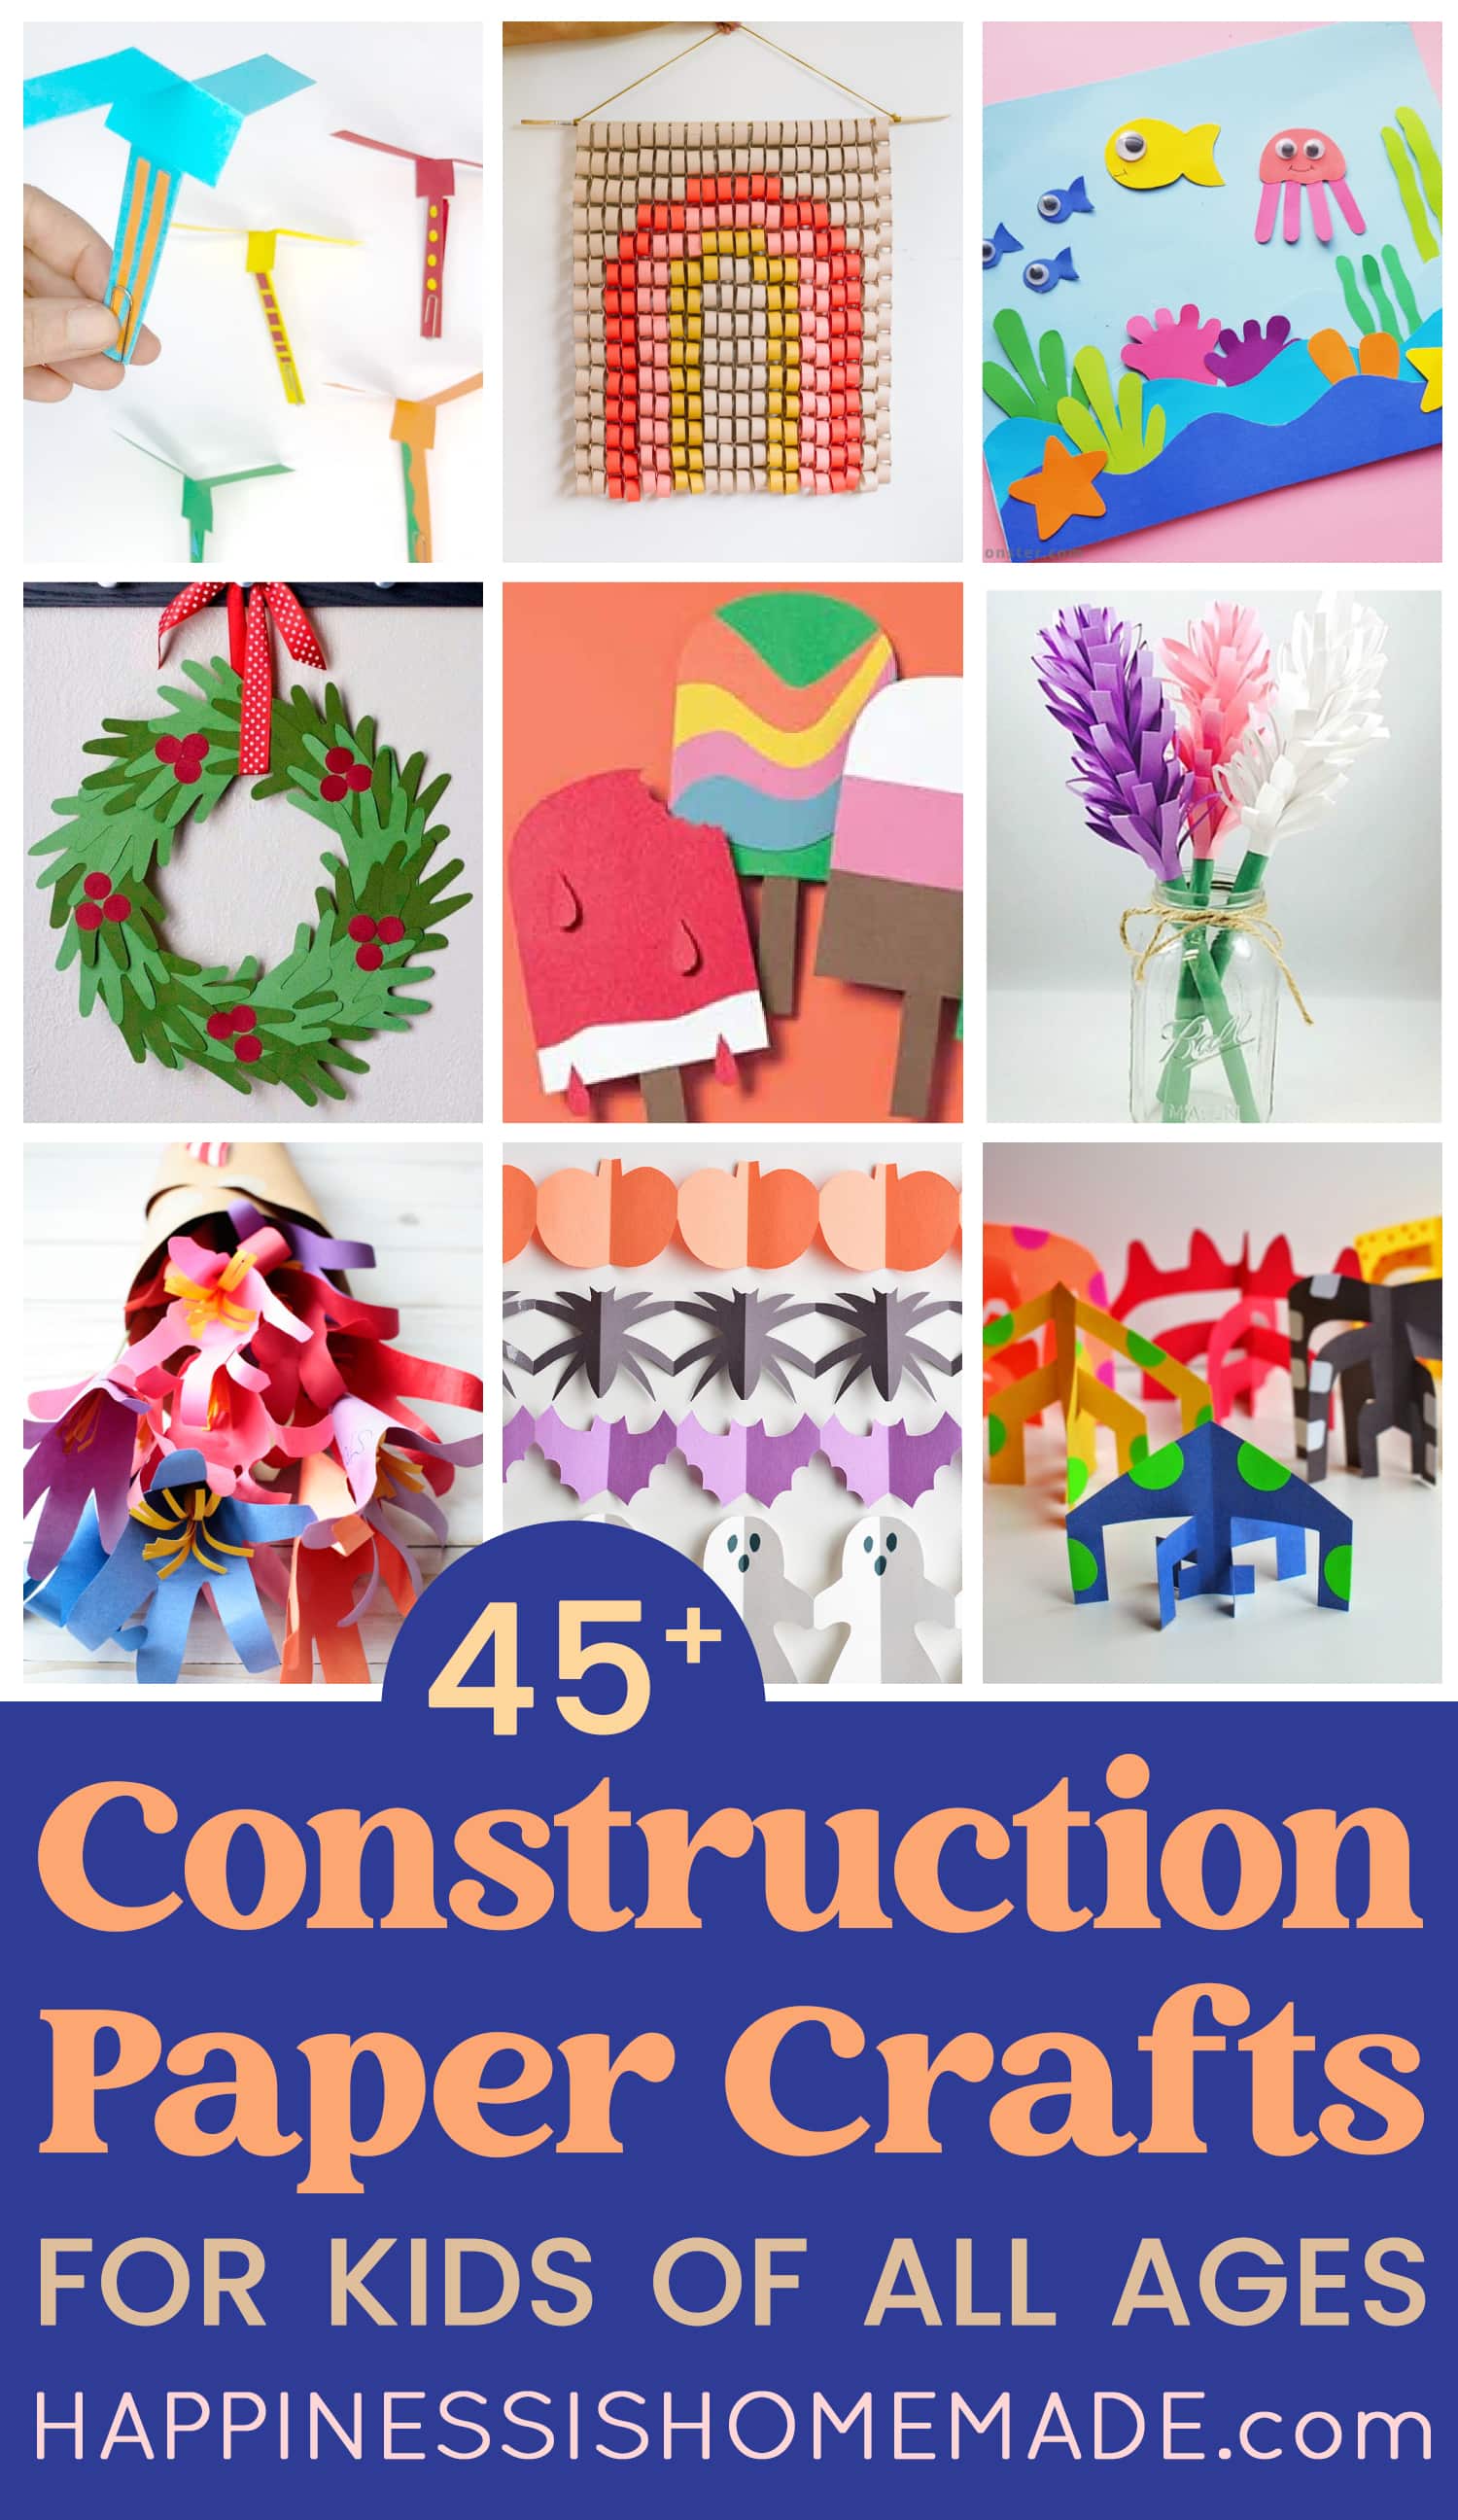 101+ Easy Construction Paper Crafts - Made with HAPPY